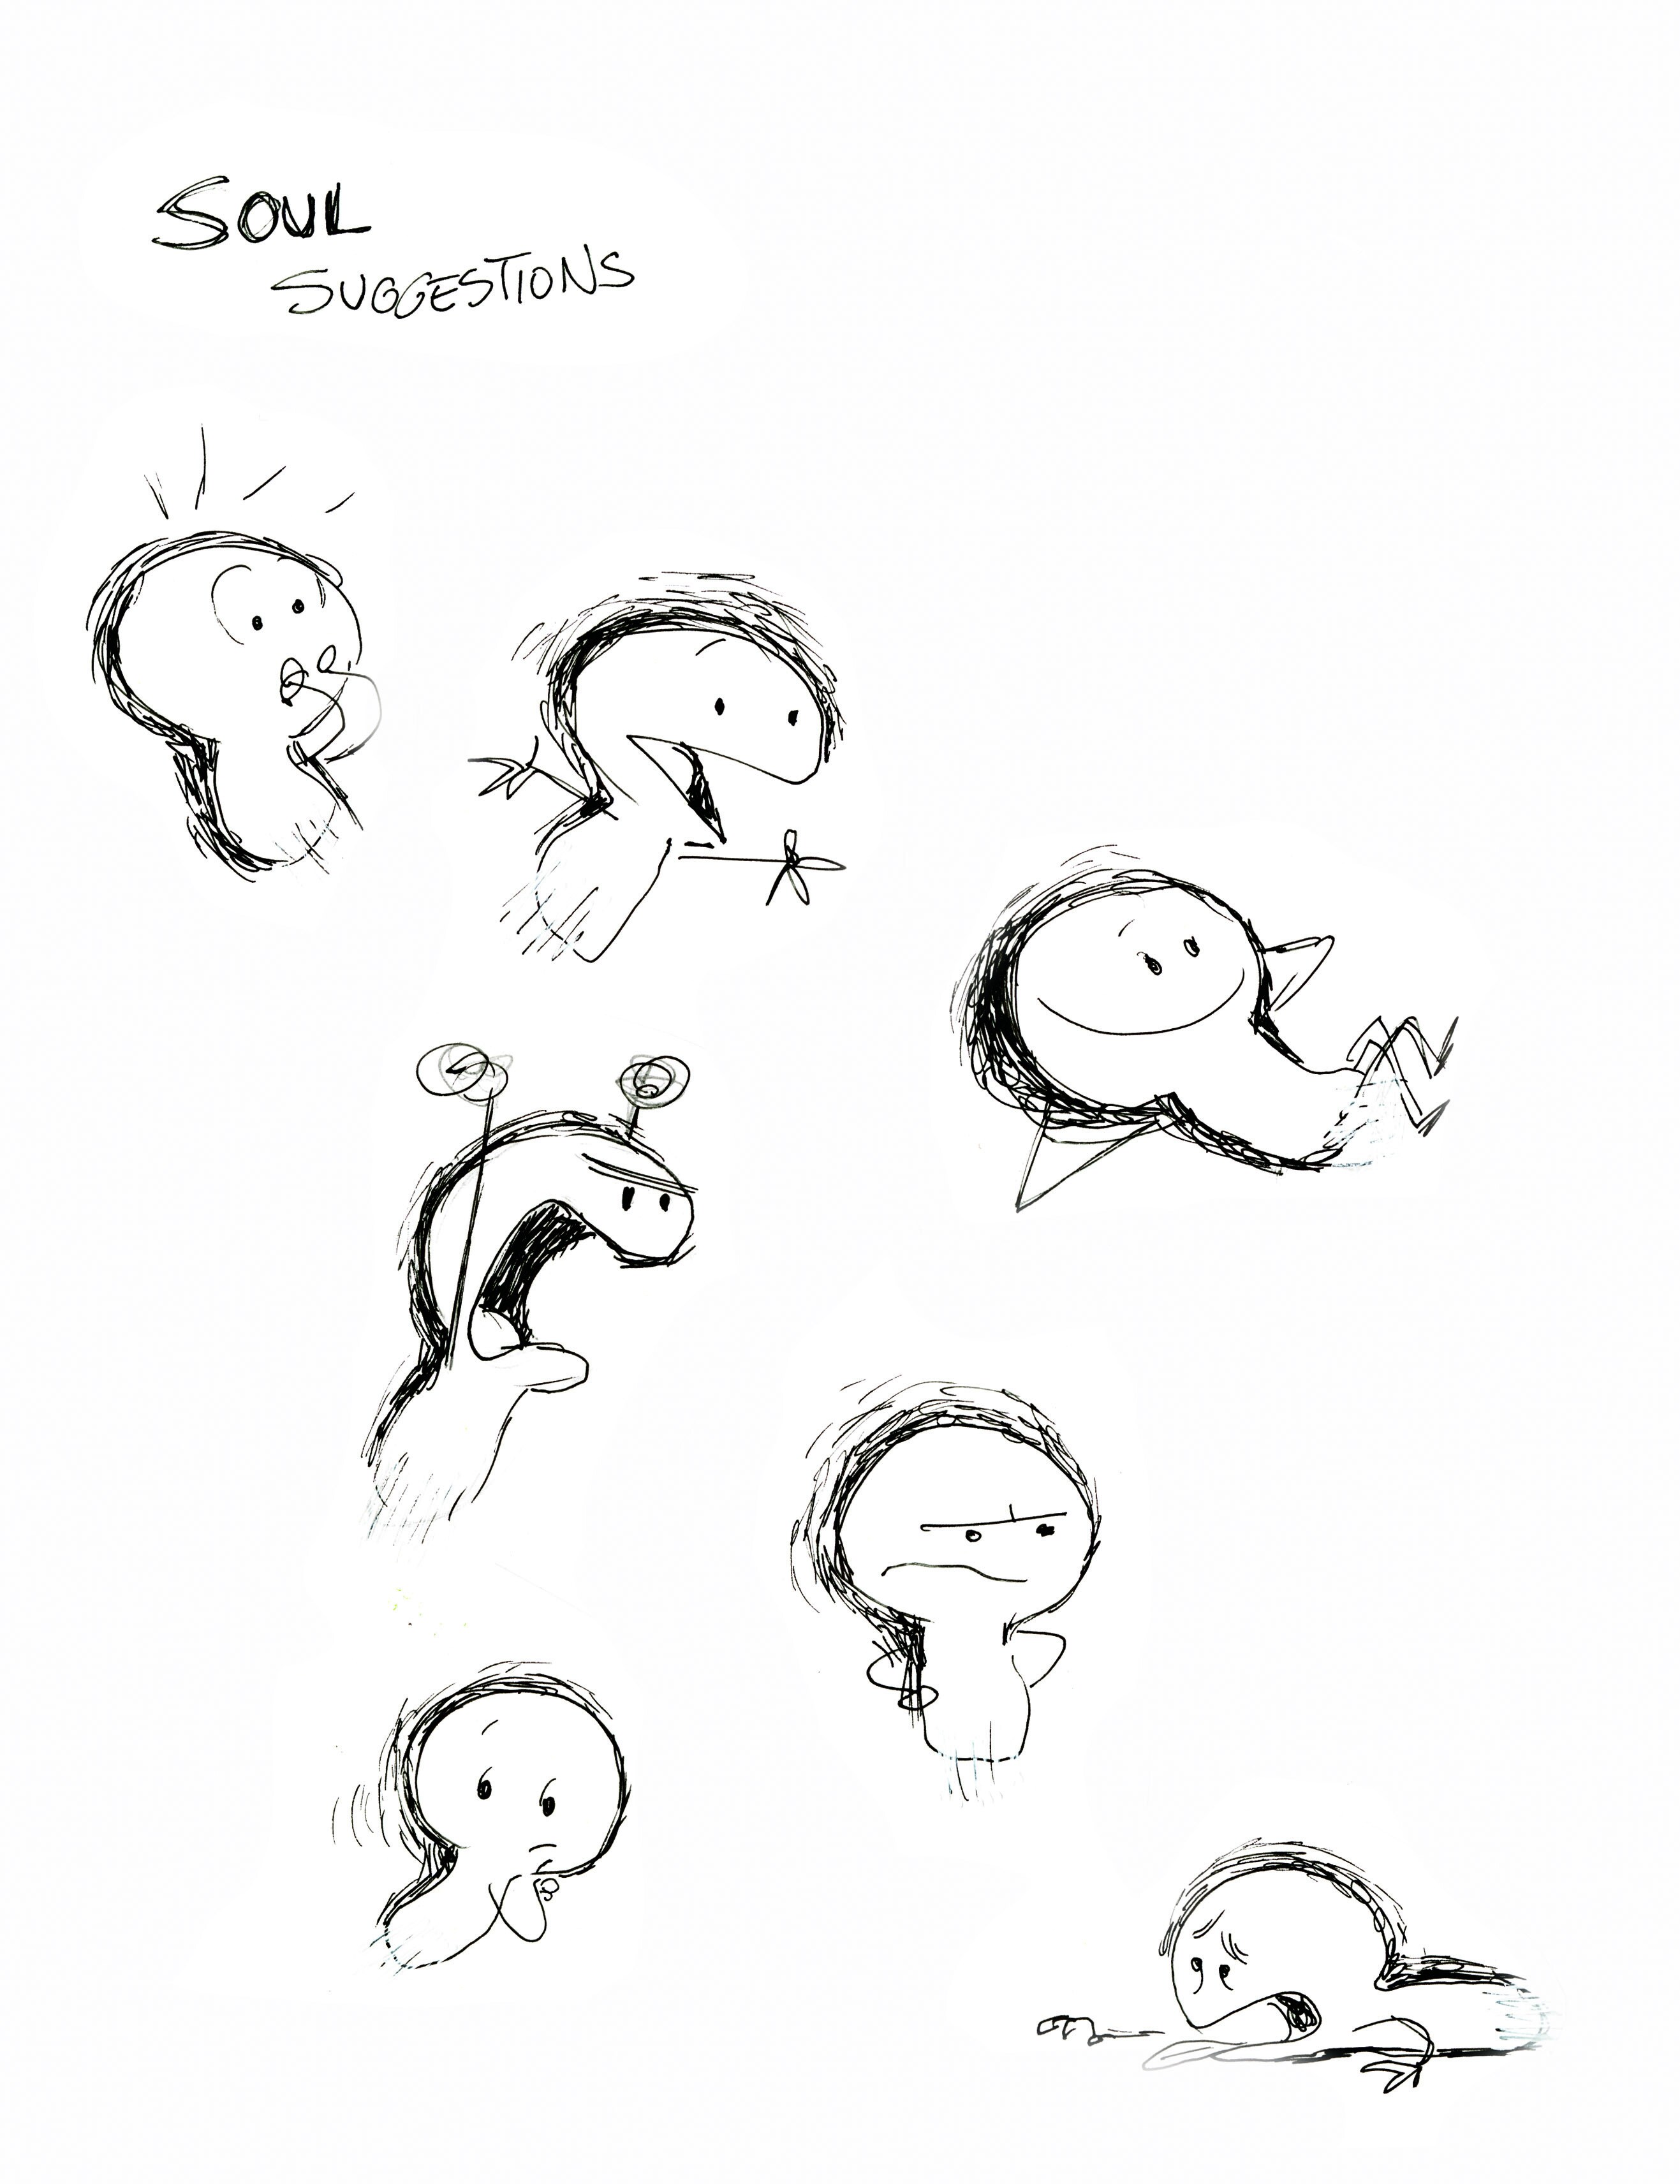 pete docter's early soul sketches